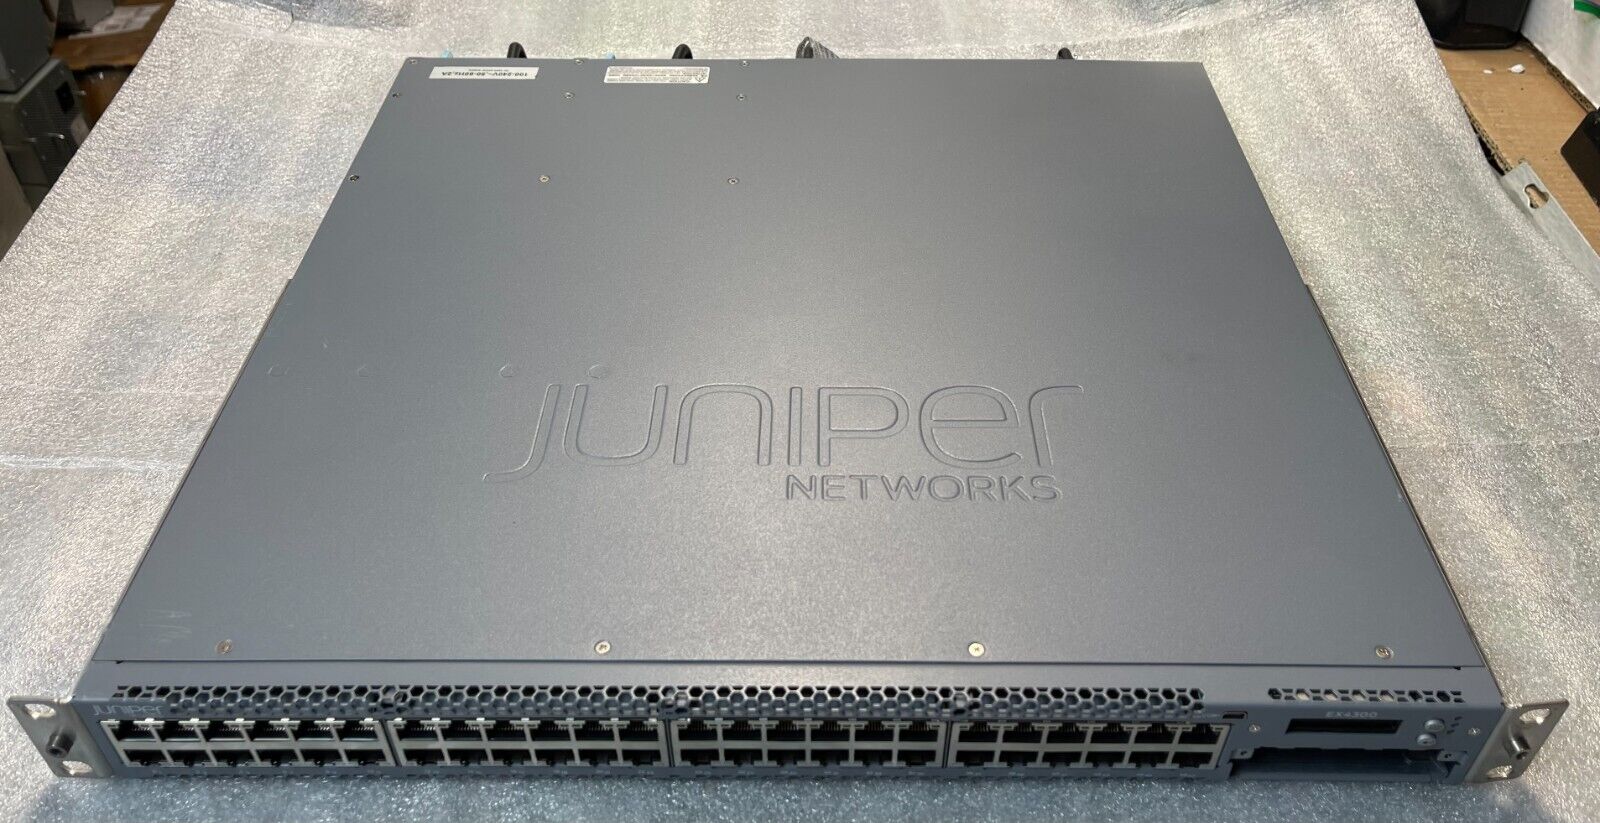 EX4300-48T Juniper  48 port 10/100/1000BASE-T switch with 1 x power supply USED